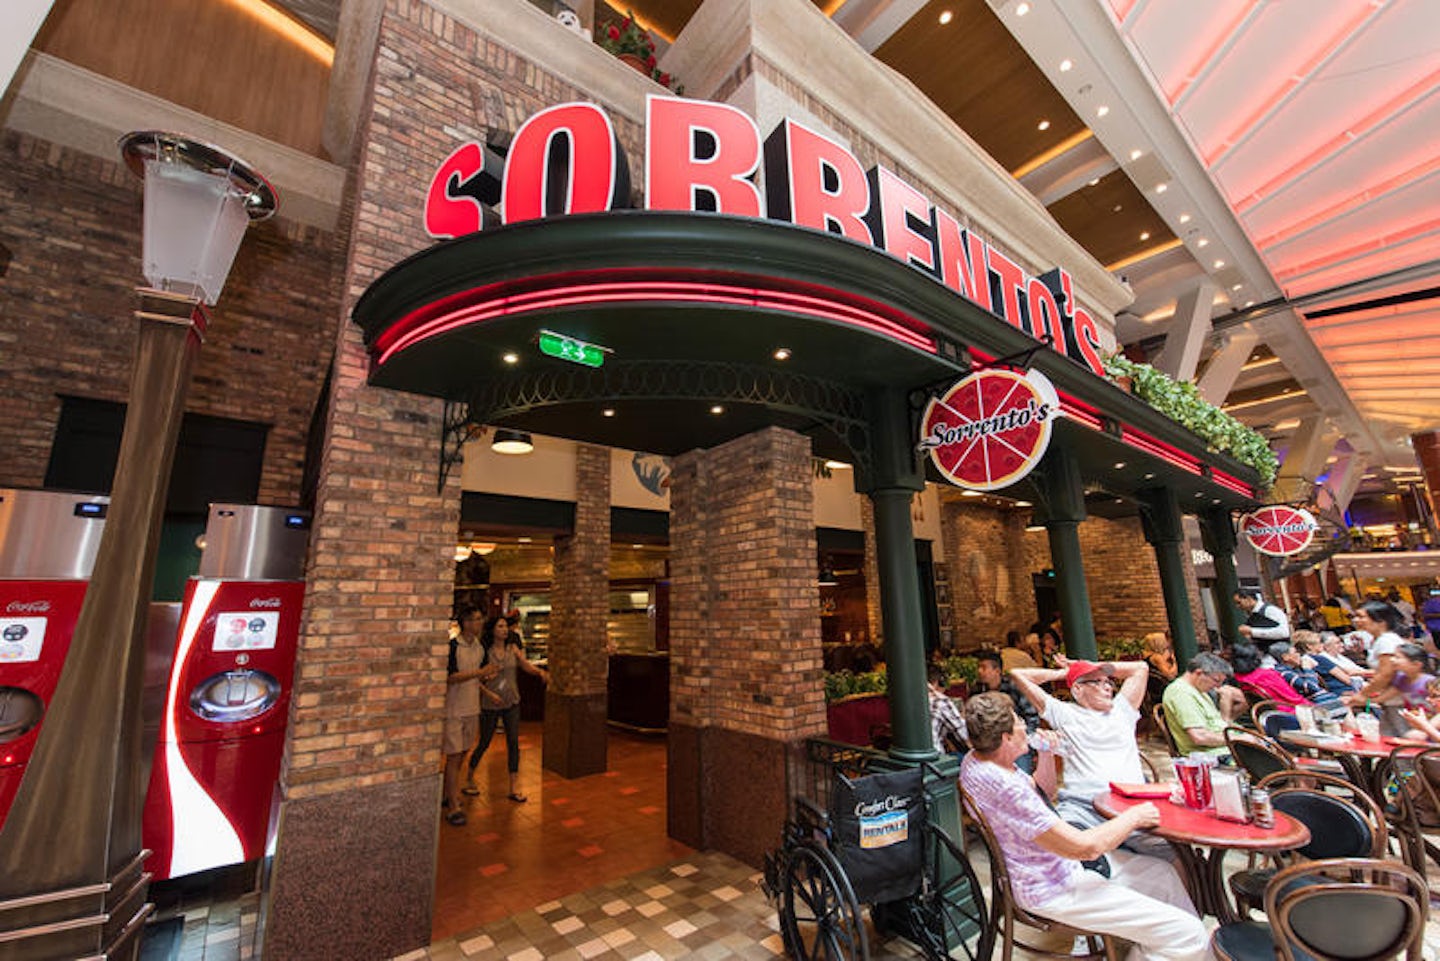 Sorrento's Pizza on Oasis of the Seas